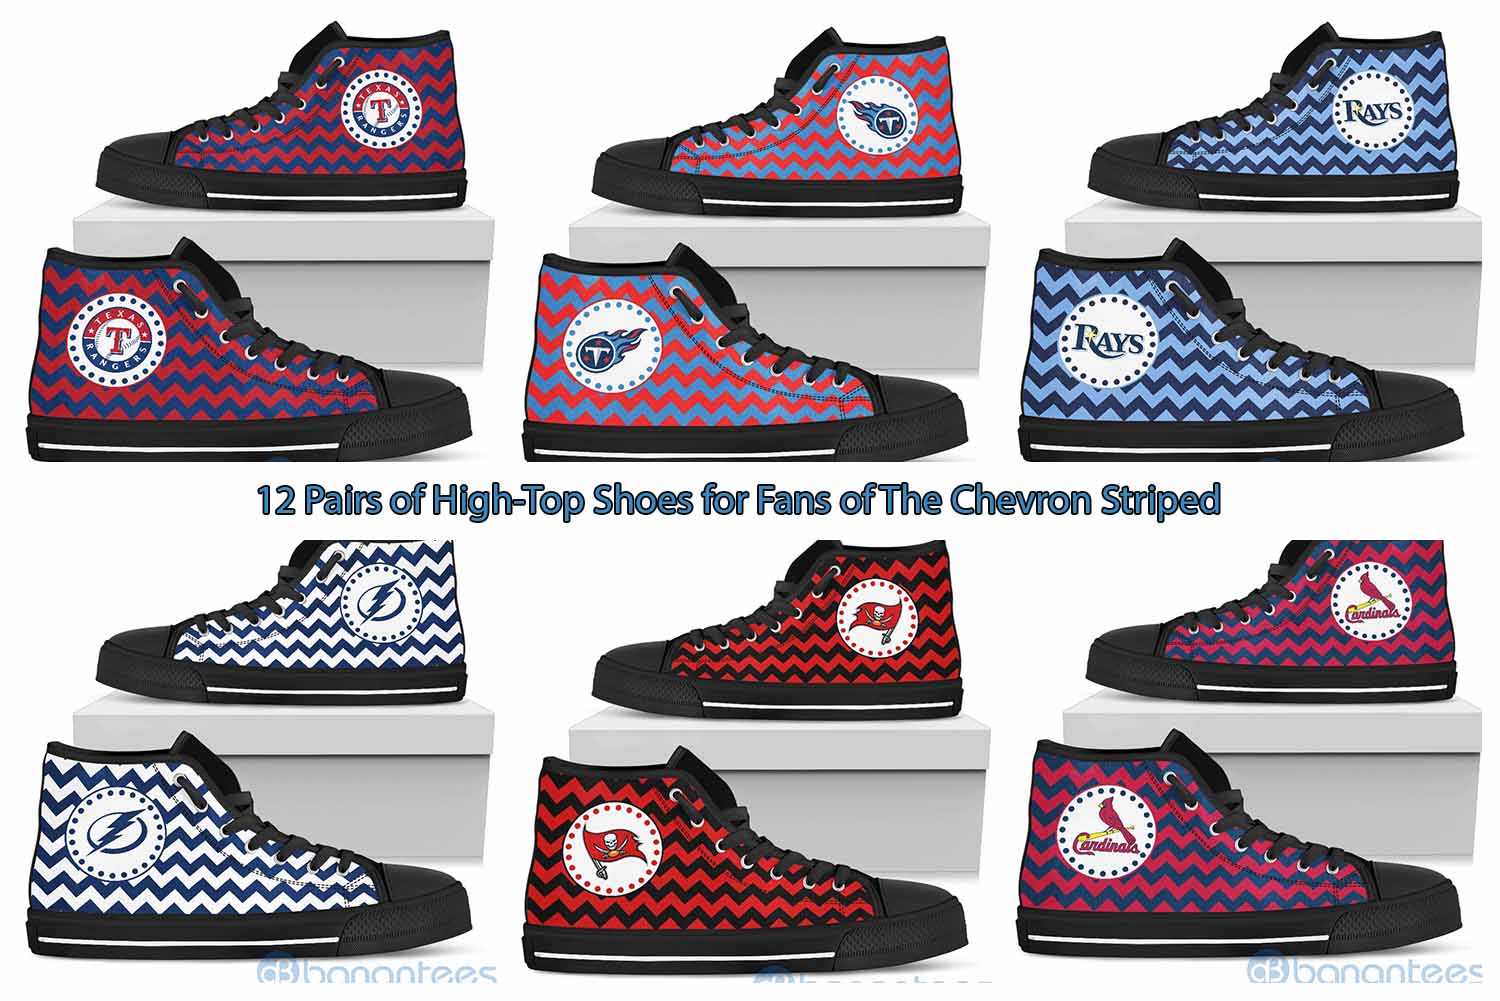 12 Pairs of High-Top Shoes for Fans of The Chevron Striped